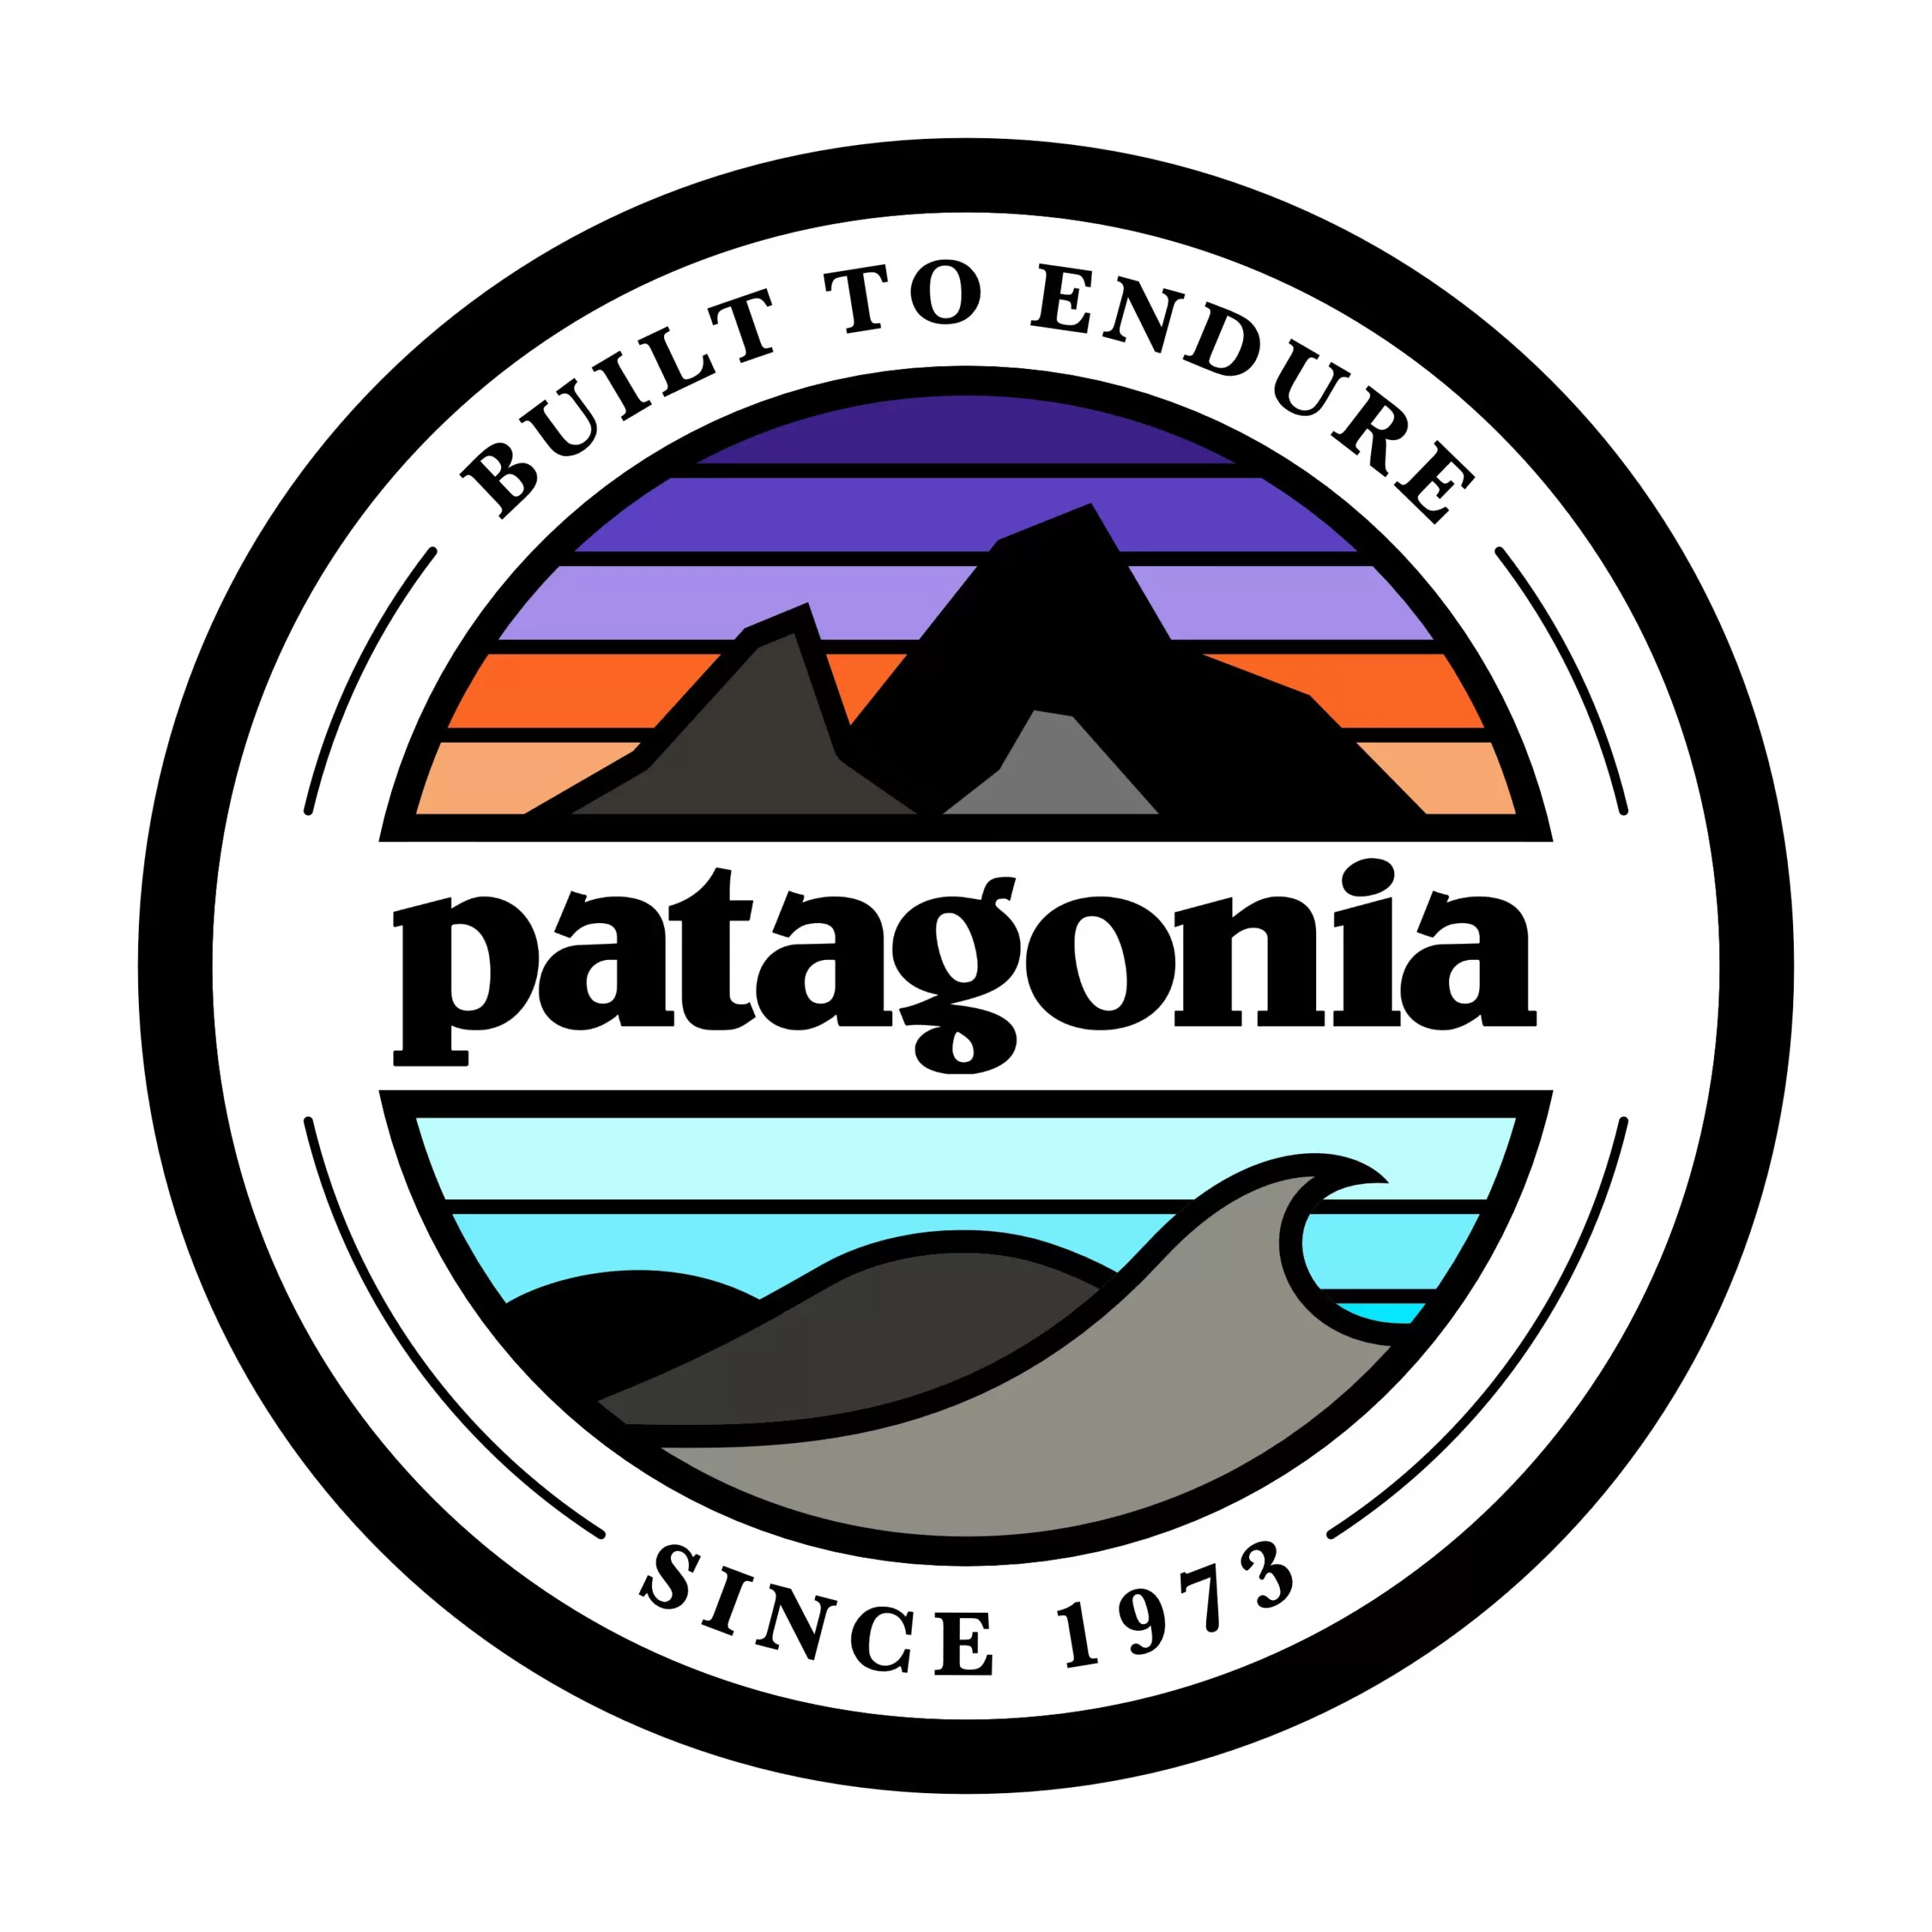 Patagonia is a designer of outdoor clothing and gear for fishing